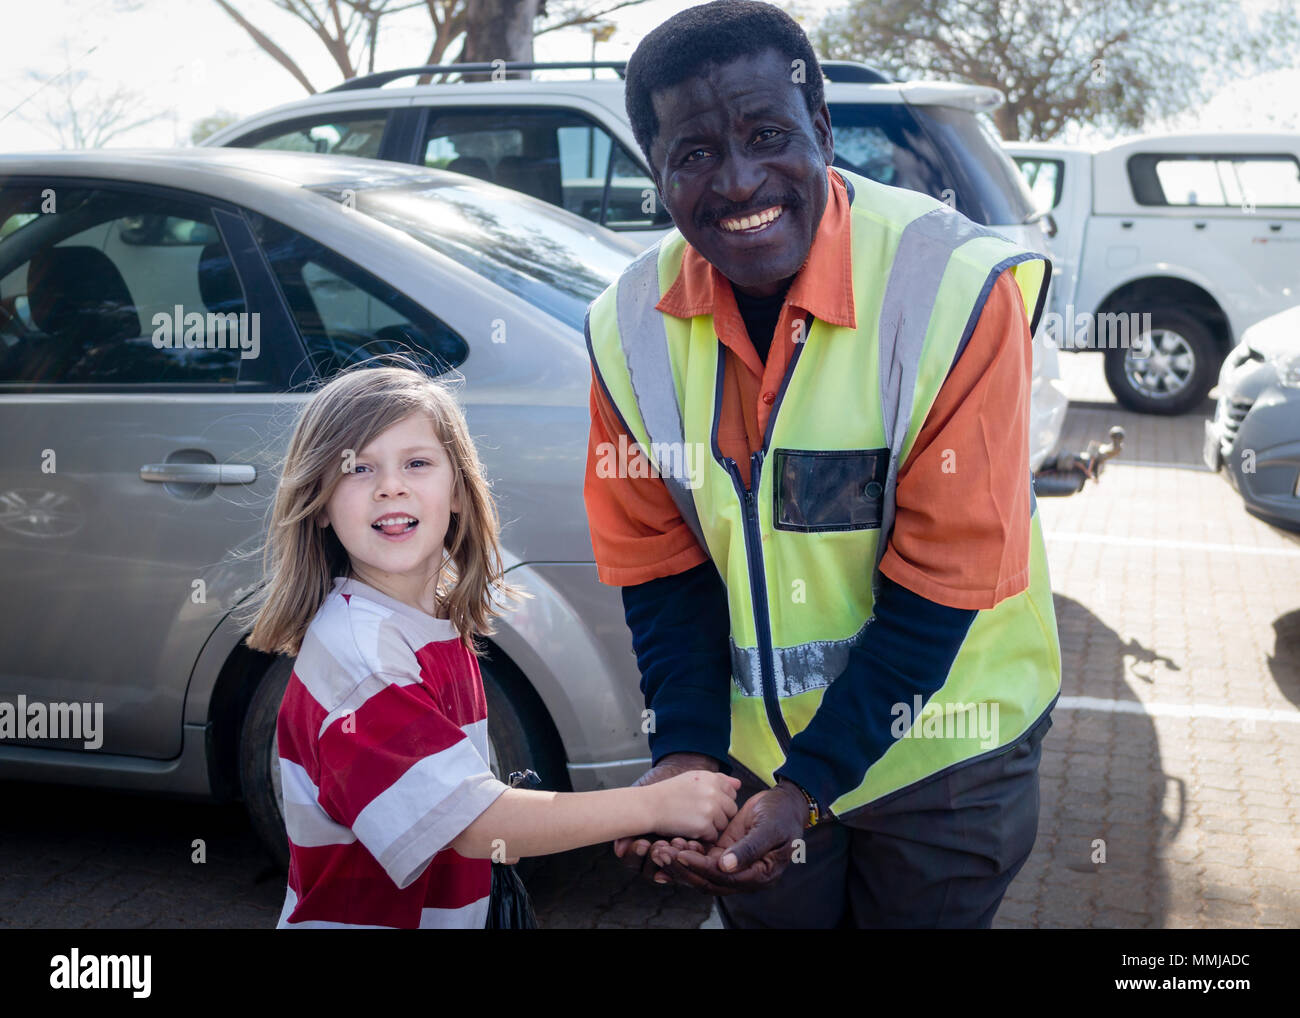 Young Caucasian White Girl Tipping Friendly Black South African Security Guard / Attendant in Outside Car Park - Controversial Self-Employment Stock Photo